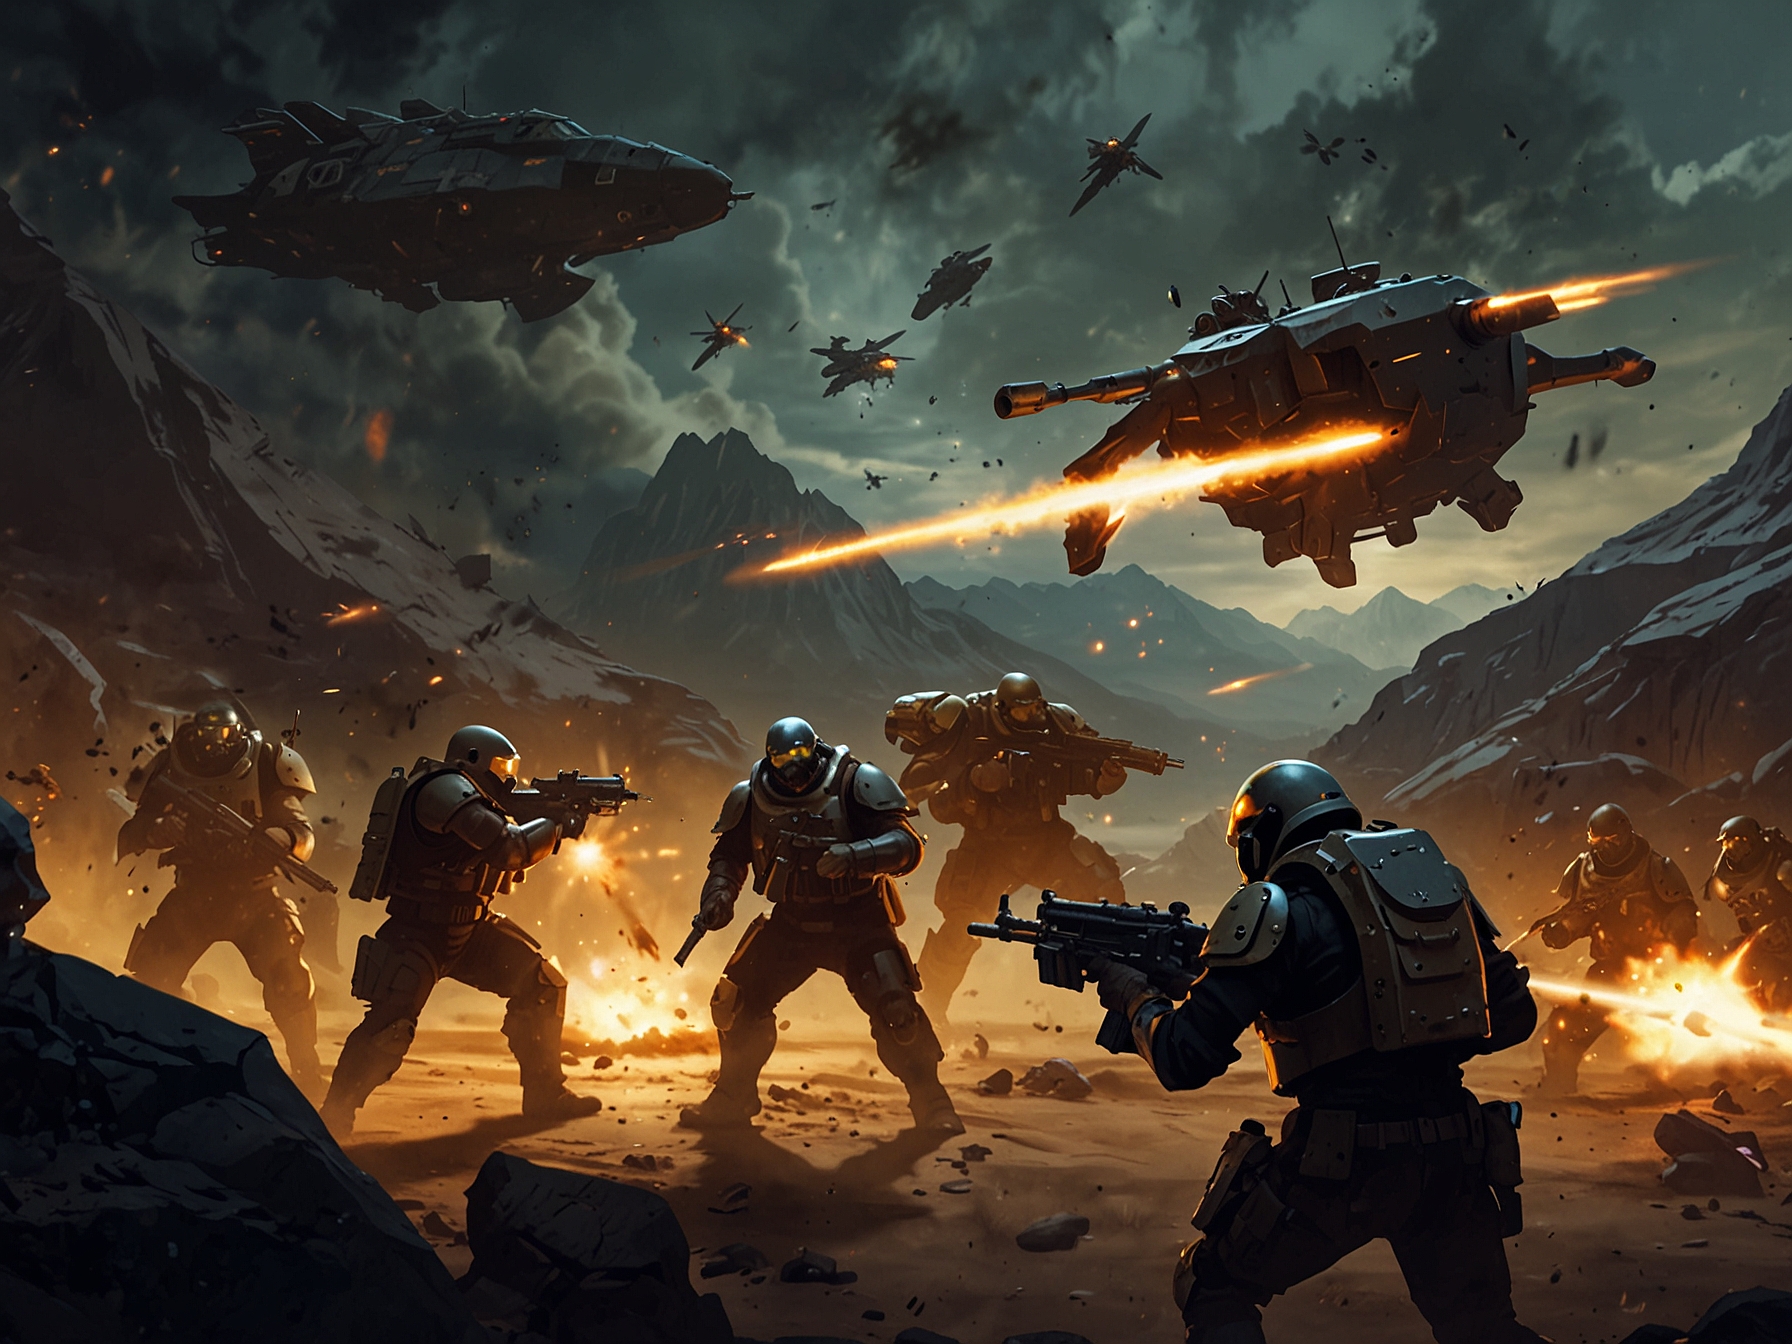 A screenshot of Helldivers 2 gameplay showcasing intense cooperative action as players deploy various weapons and stratagems in a hostile, alien-infested environment.